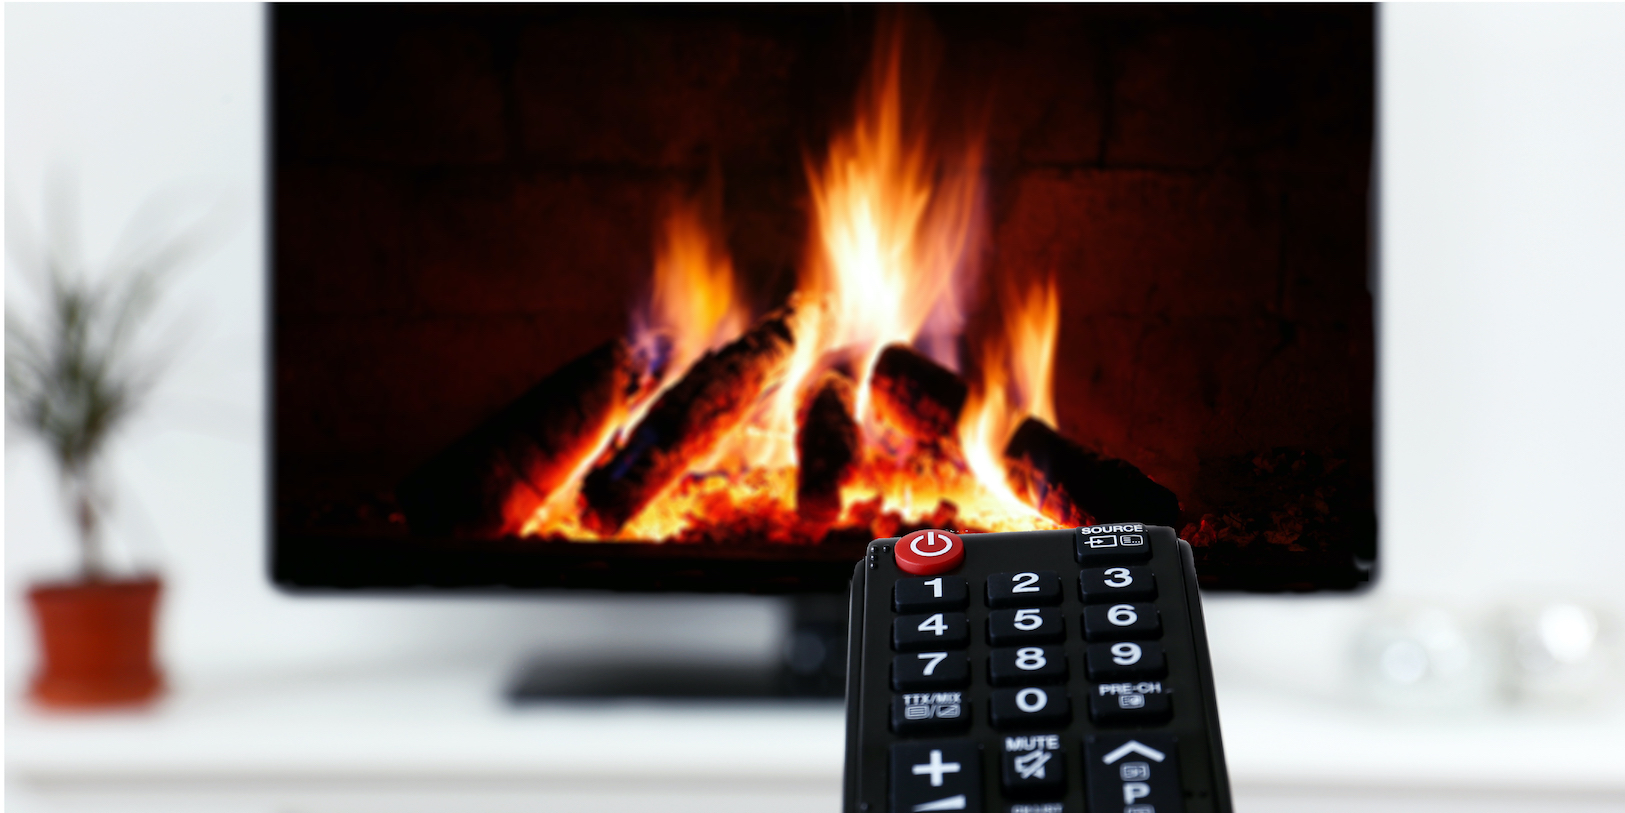 Fireplace video on a TV with a remote pointed at it